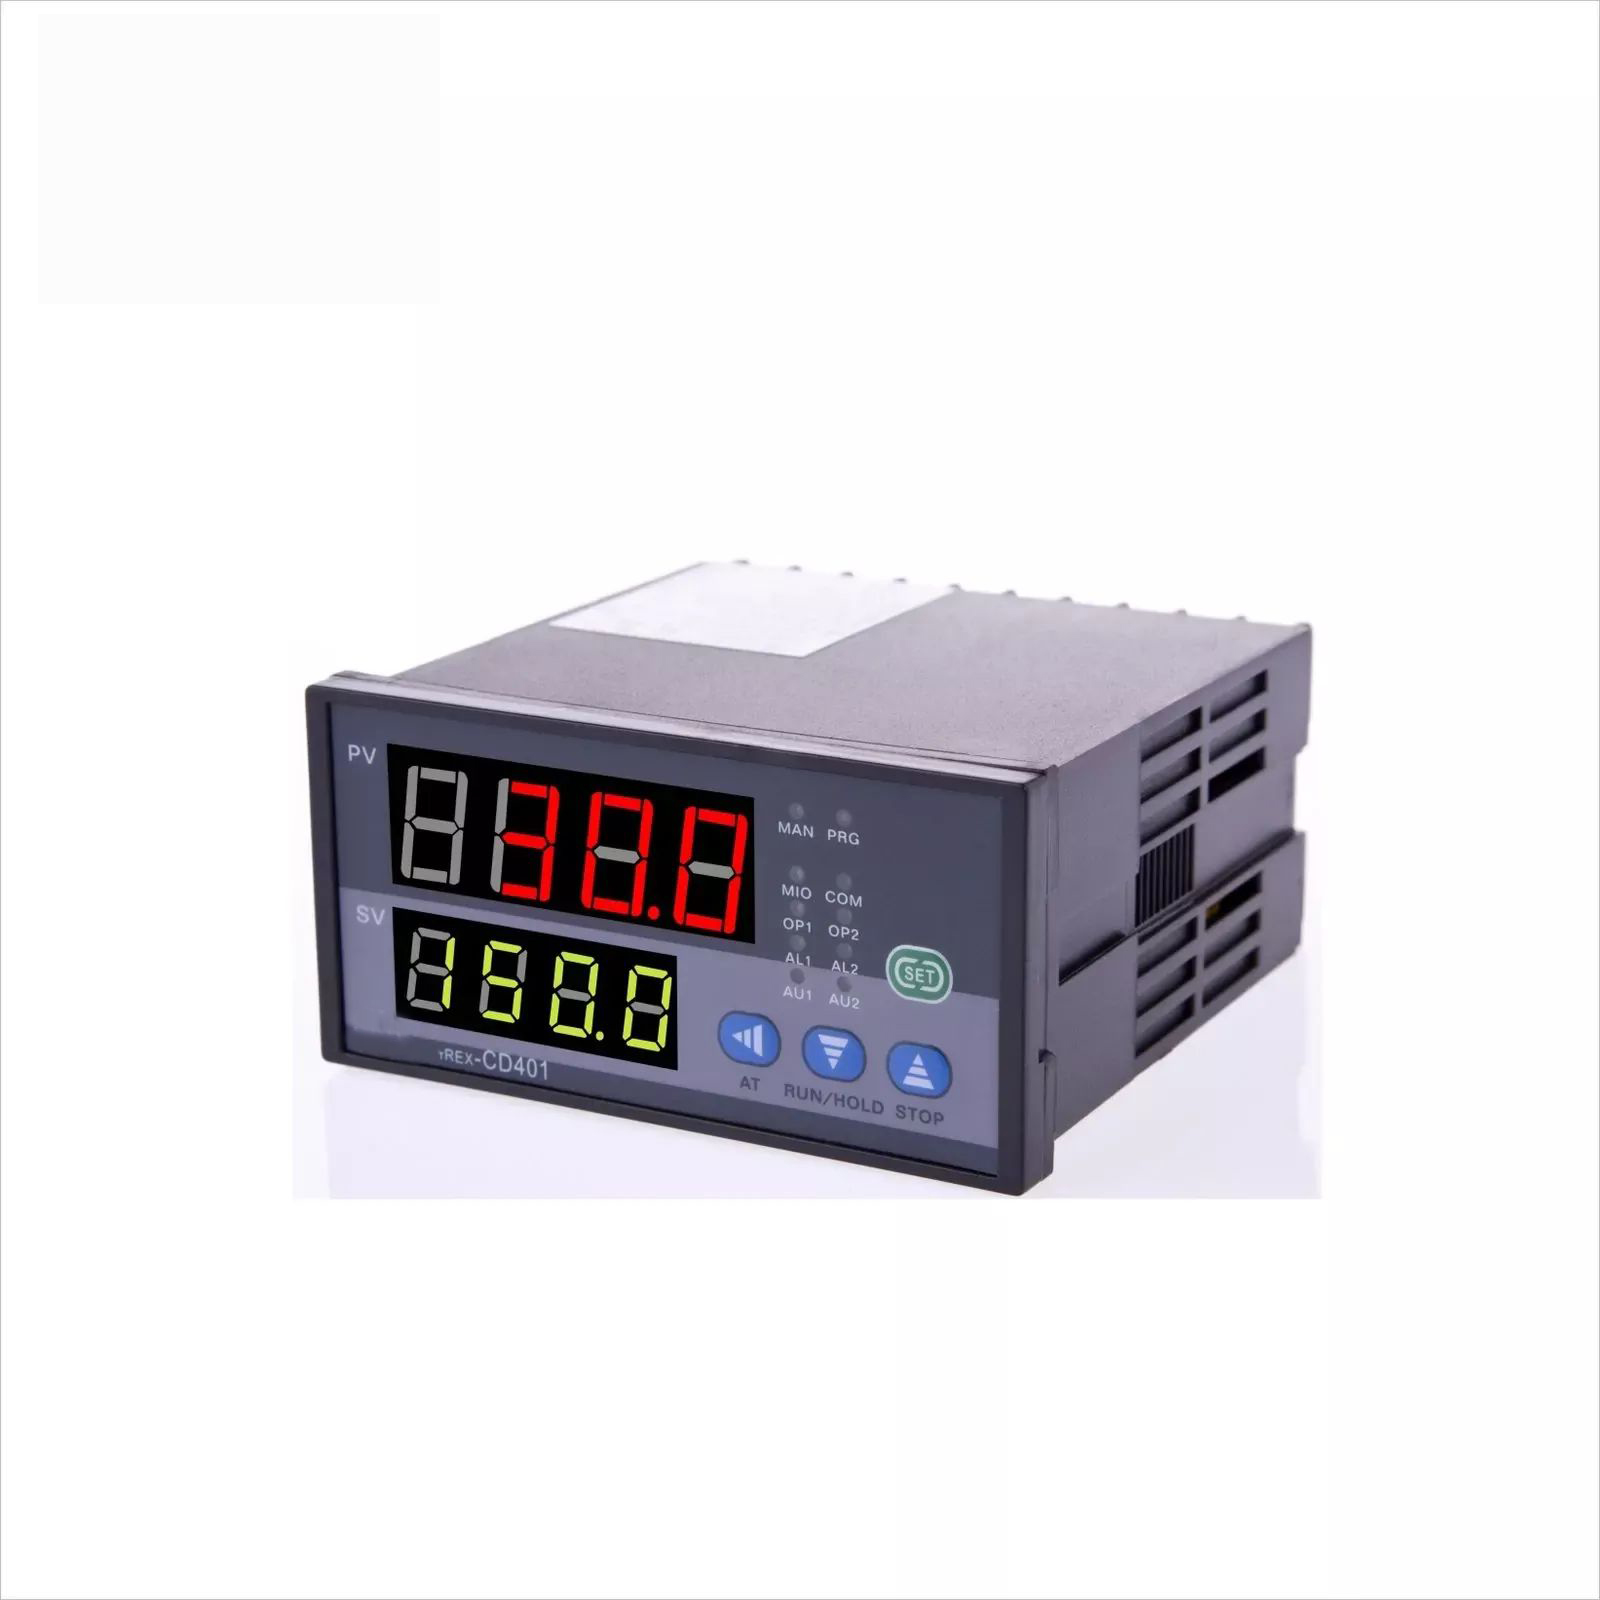 AT908-CD401 10 different output modules and 4-20mA alarm Intelligent temperature PID controller Featured Image